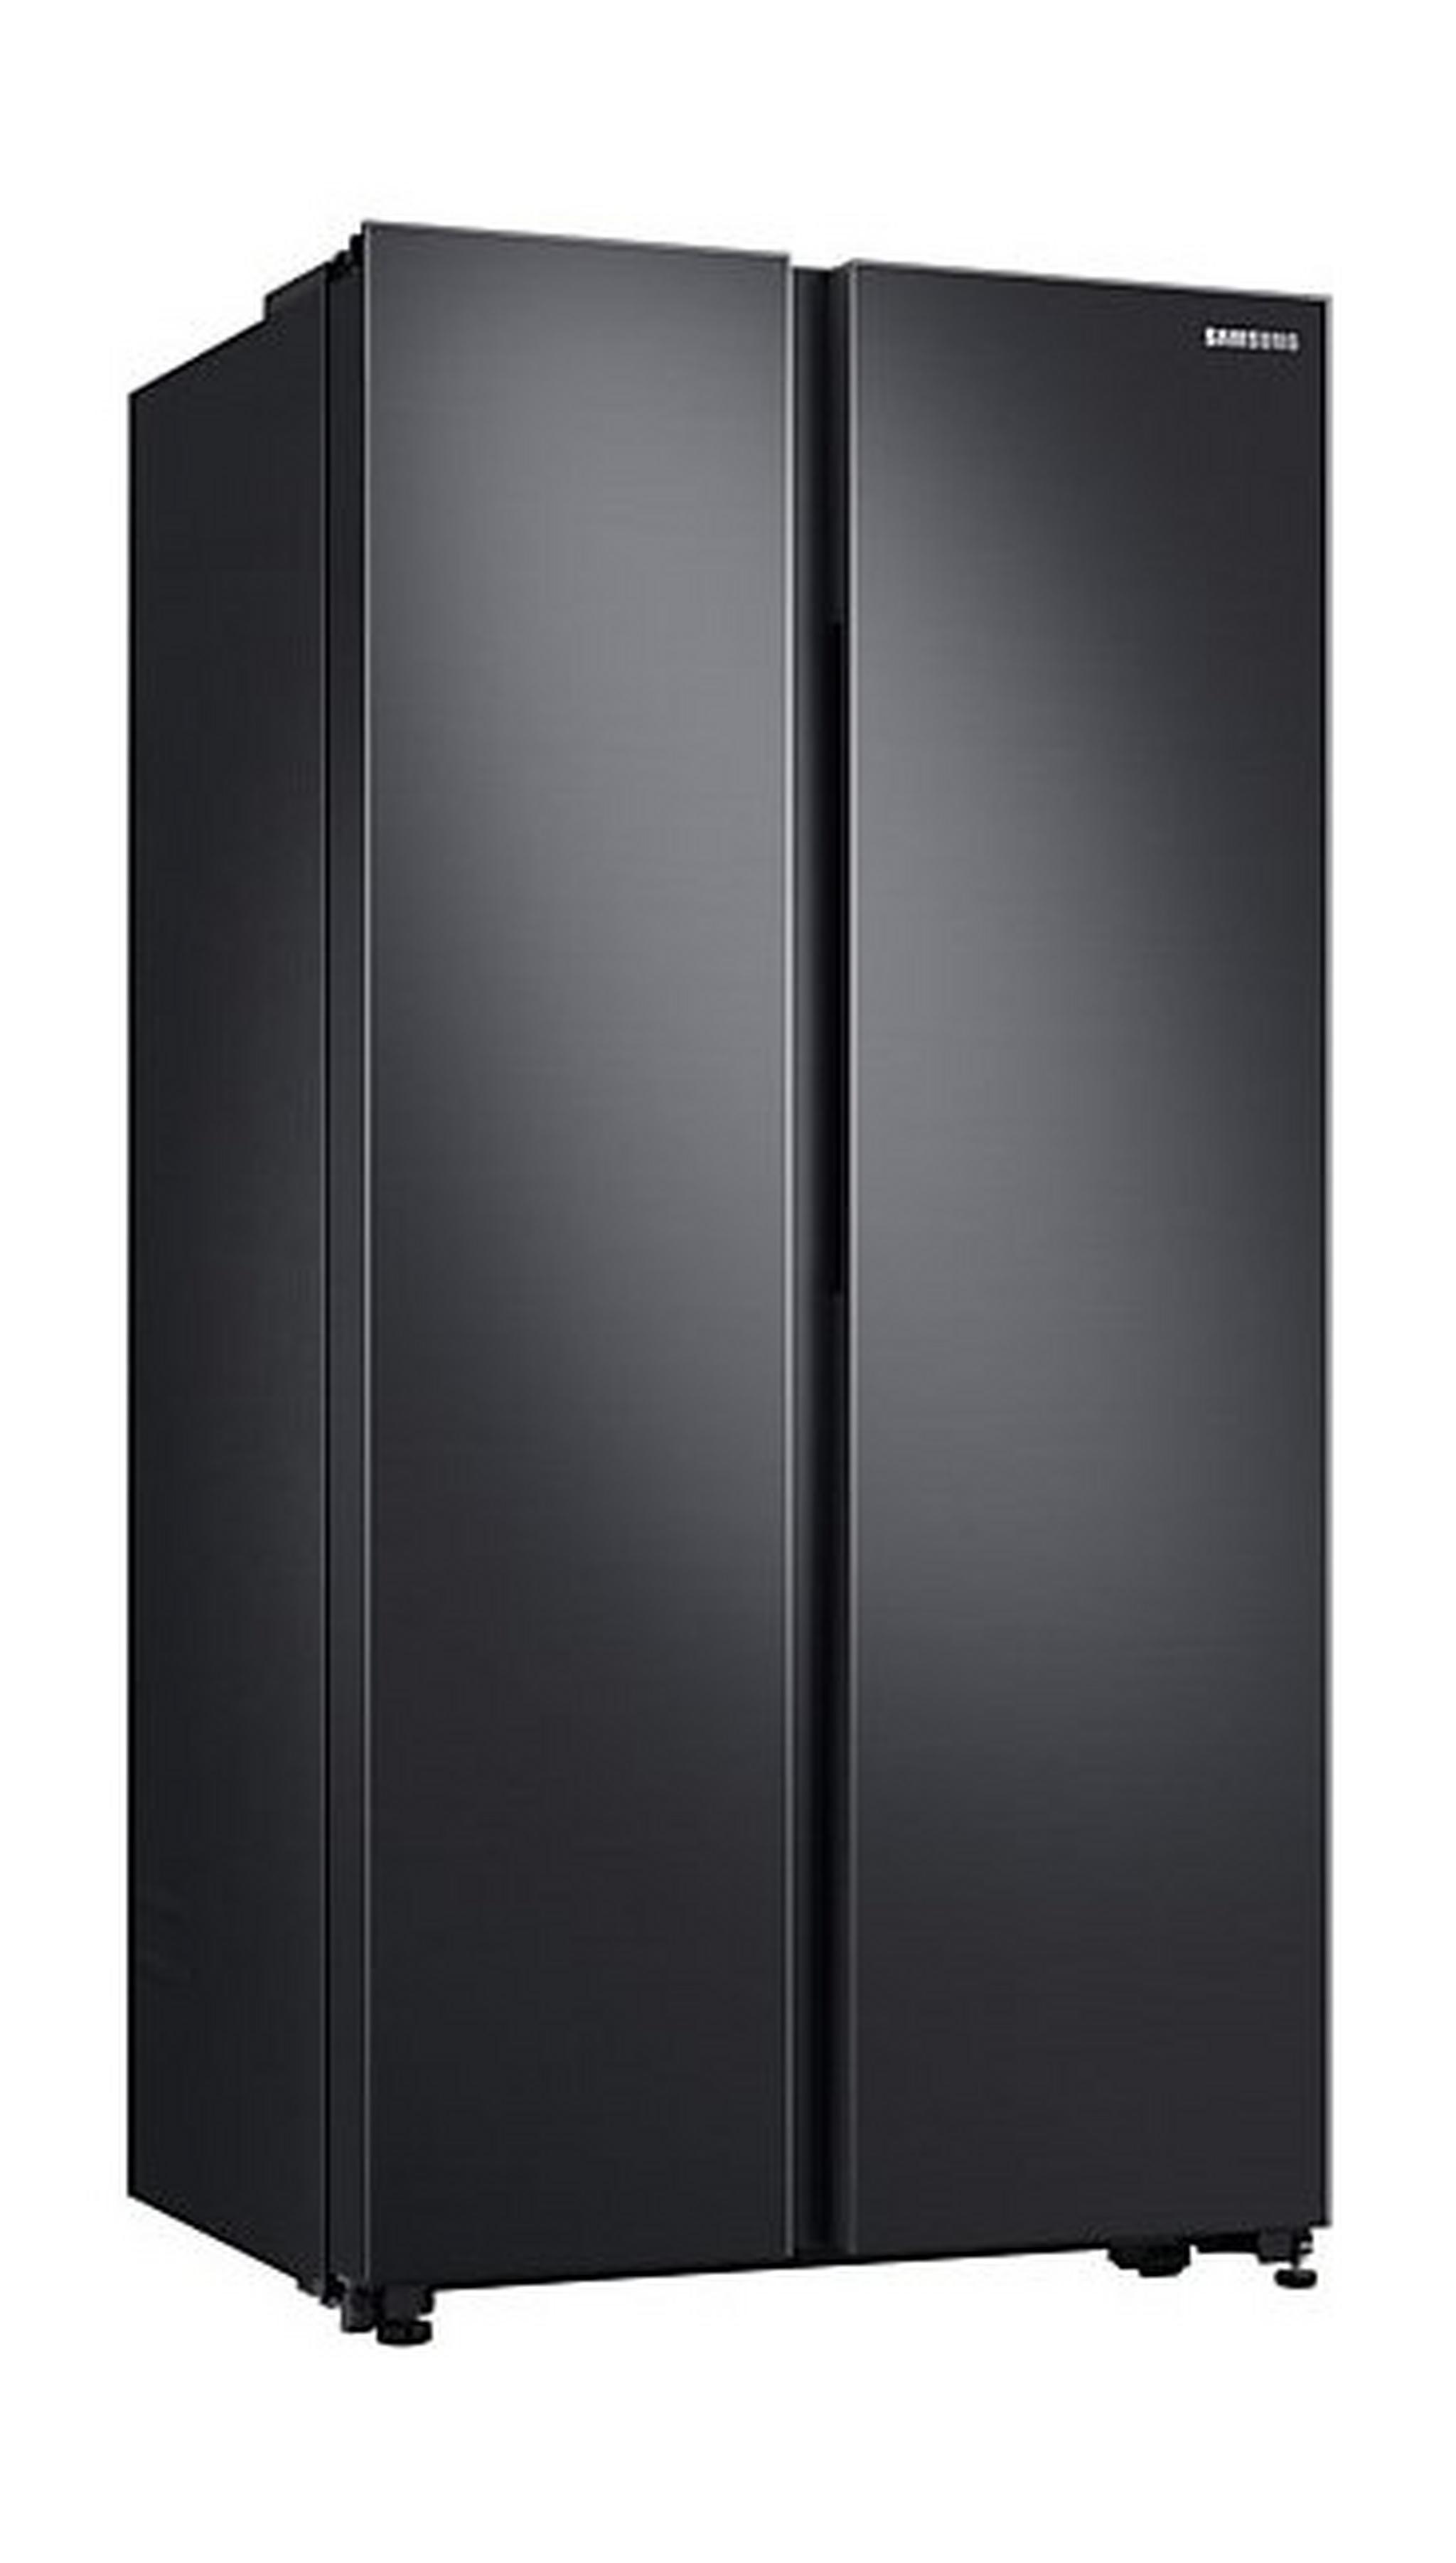 Samsung 23CFT Side By Side Refrigerator and Freezer - RS62R5001B4